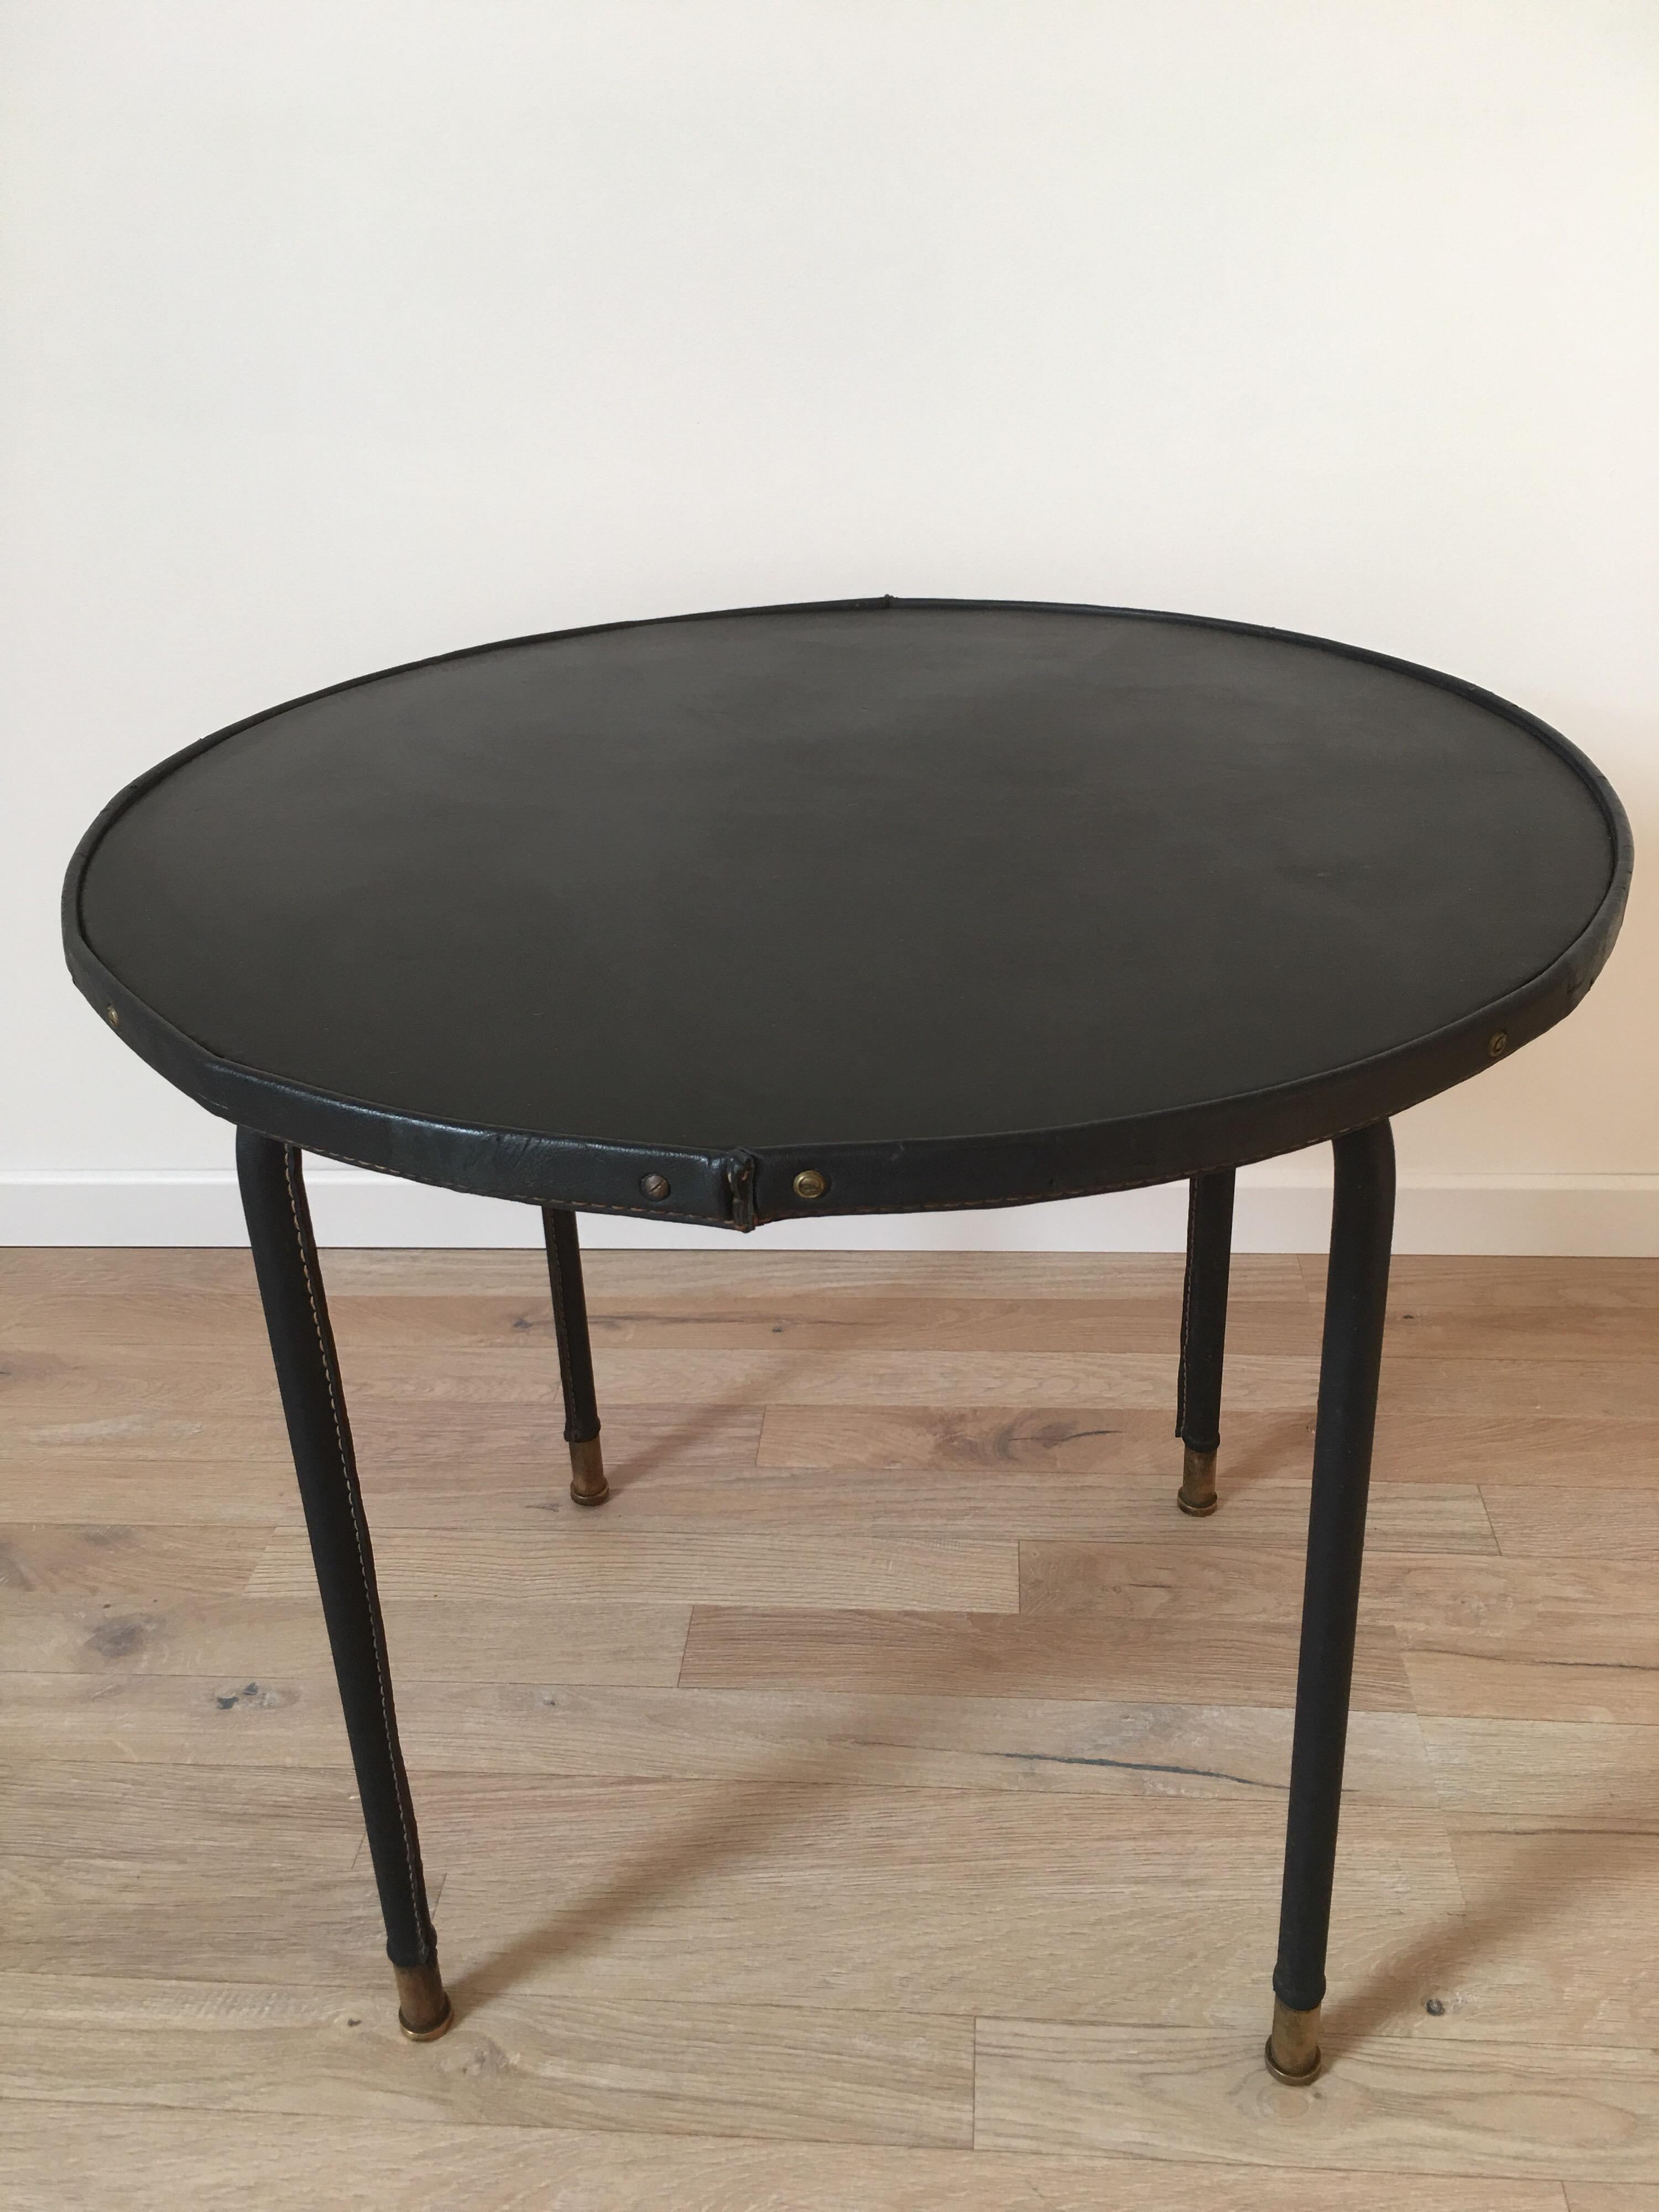 Black stitched leather side table designed in the 1950s.
The round top is based on 4 black leather-clad feet ending in bronze clogs. The previous owner changed the leather of the tray 20 years ago
The table is in good condition with a vintage patina